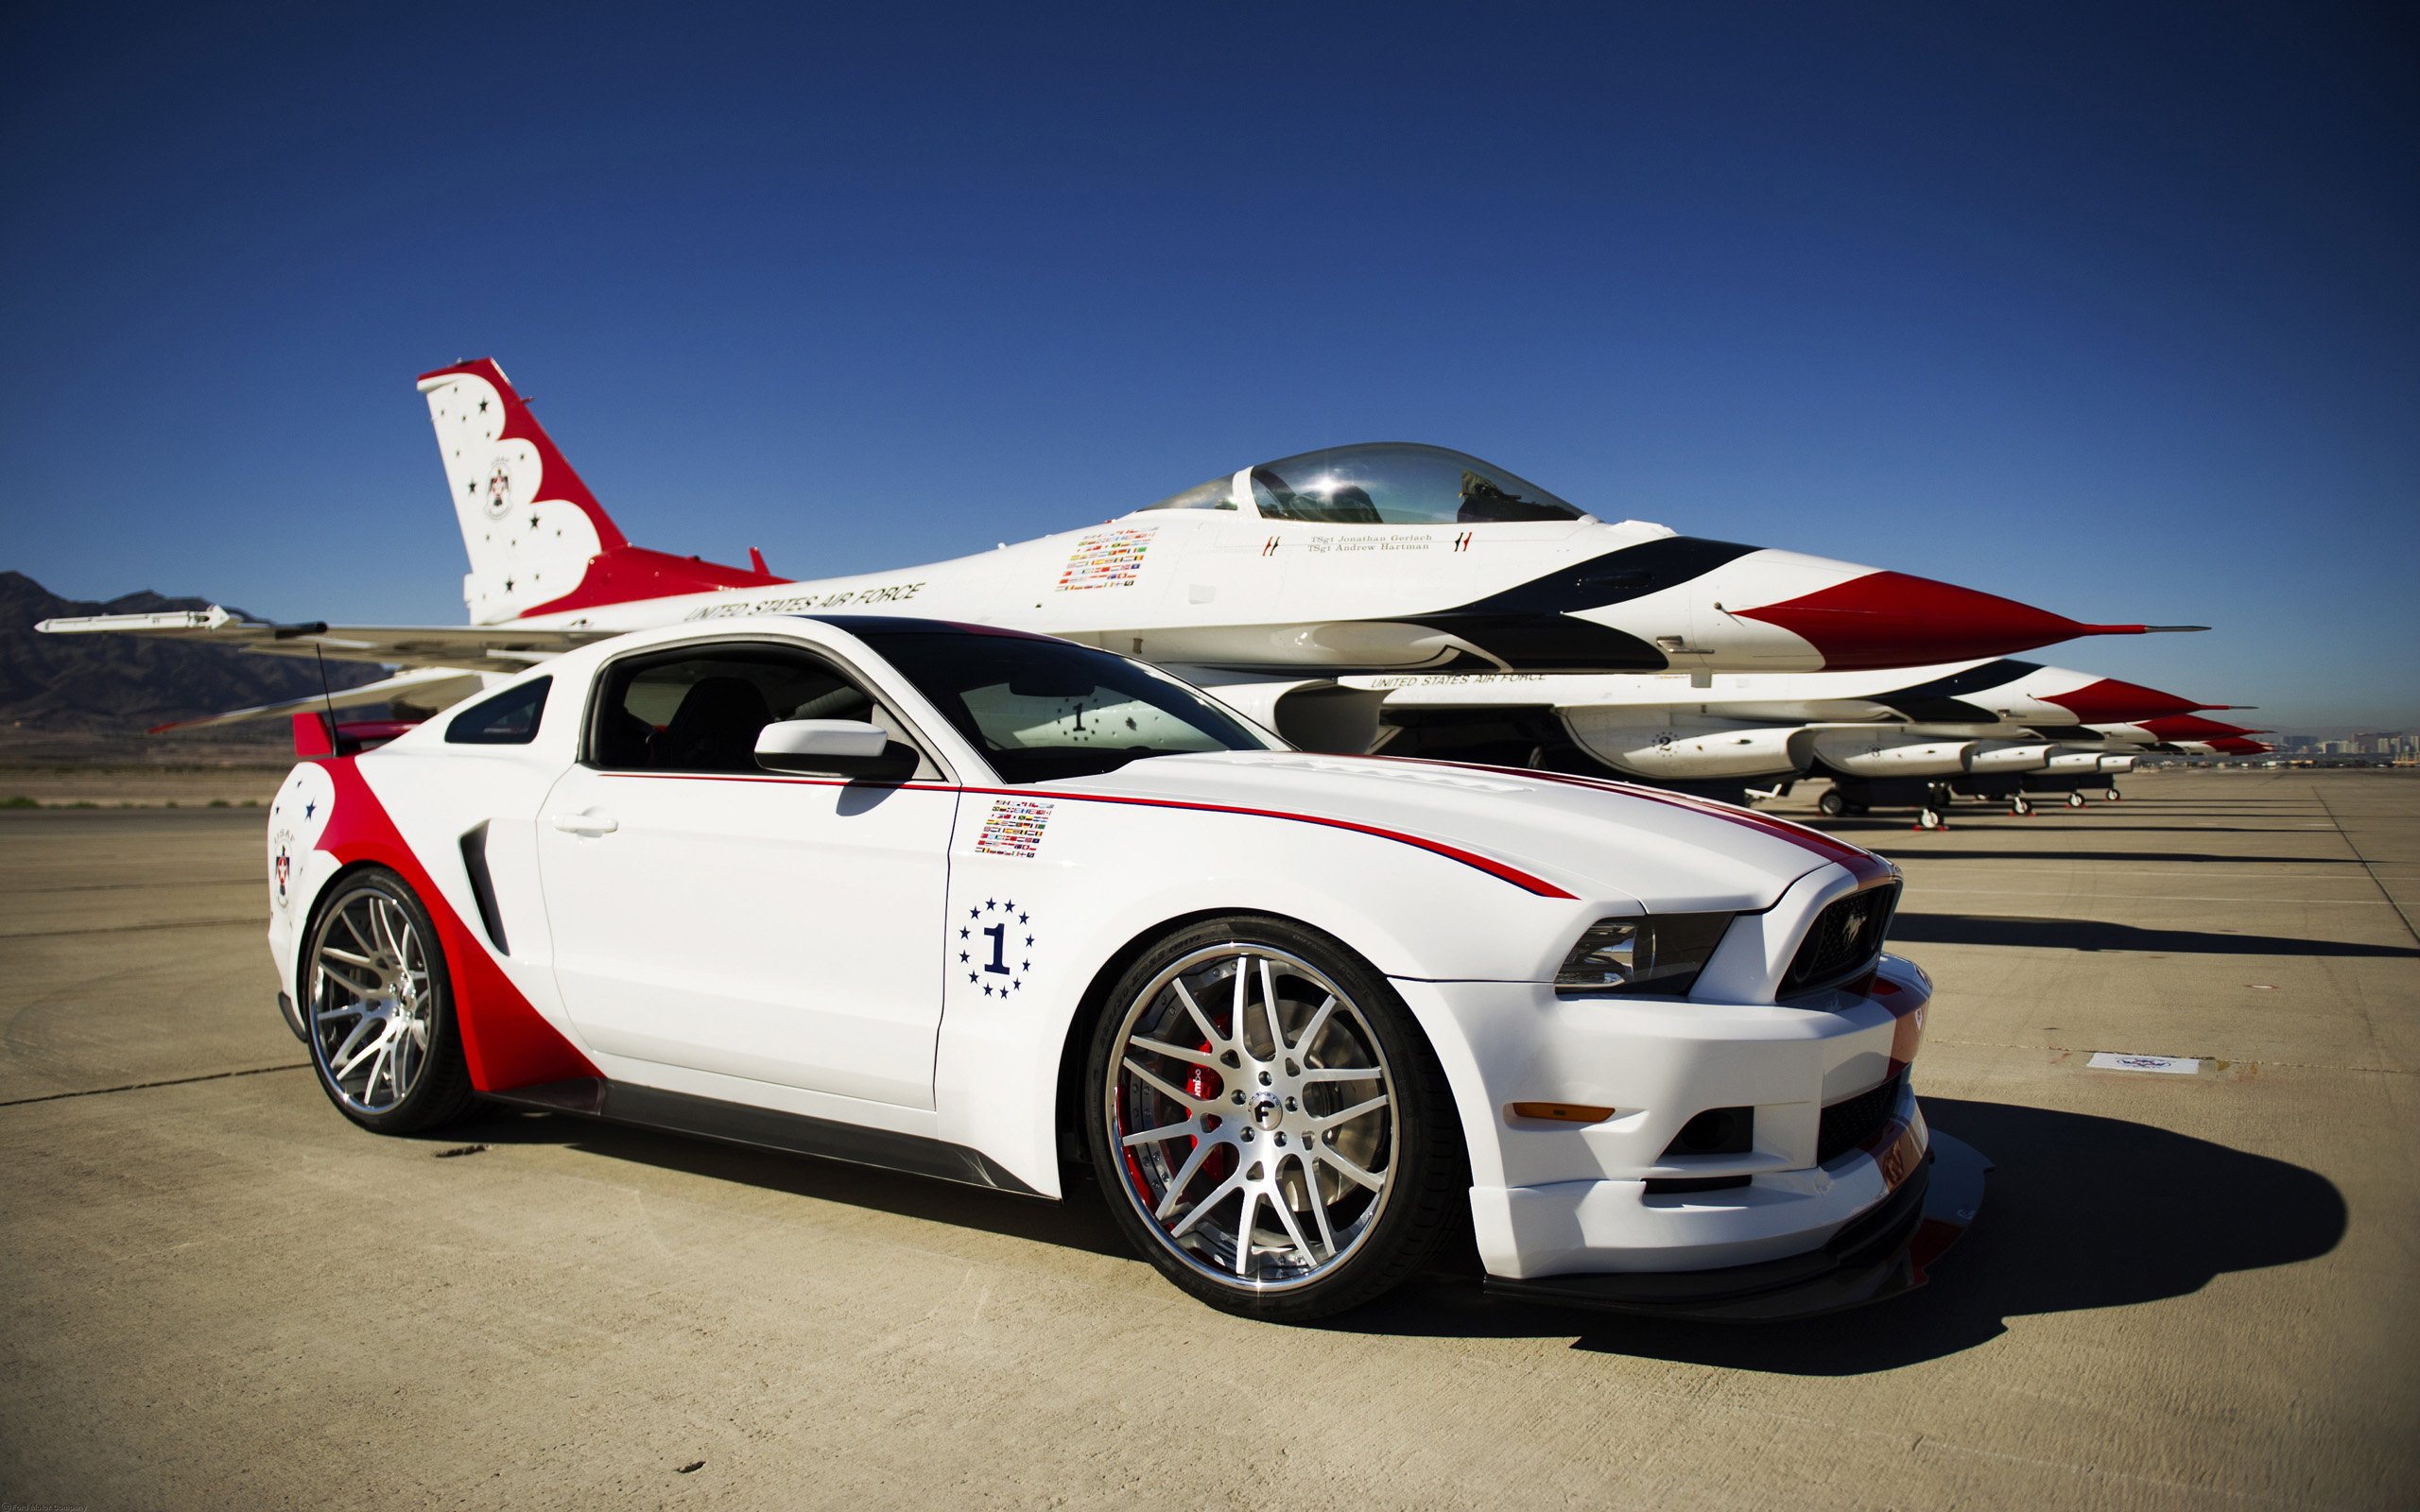  Ford Mustang GT US Air Force Thunderbirds Edition Wallpaper HD